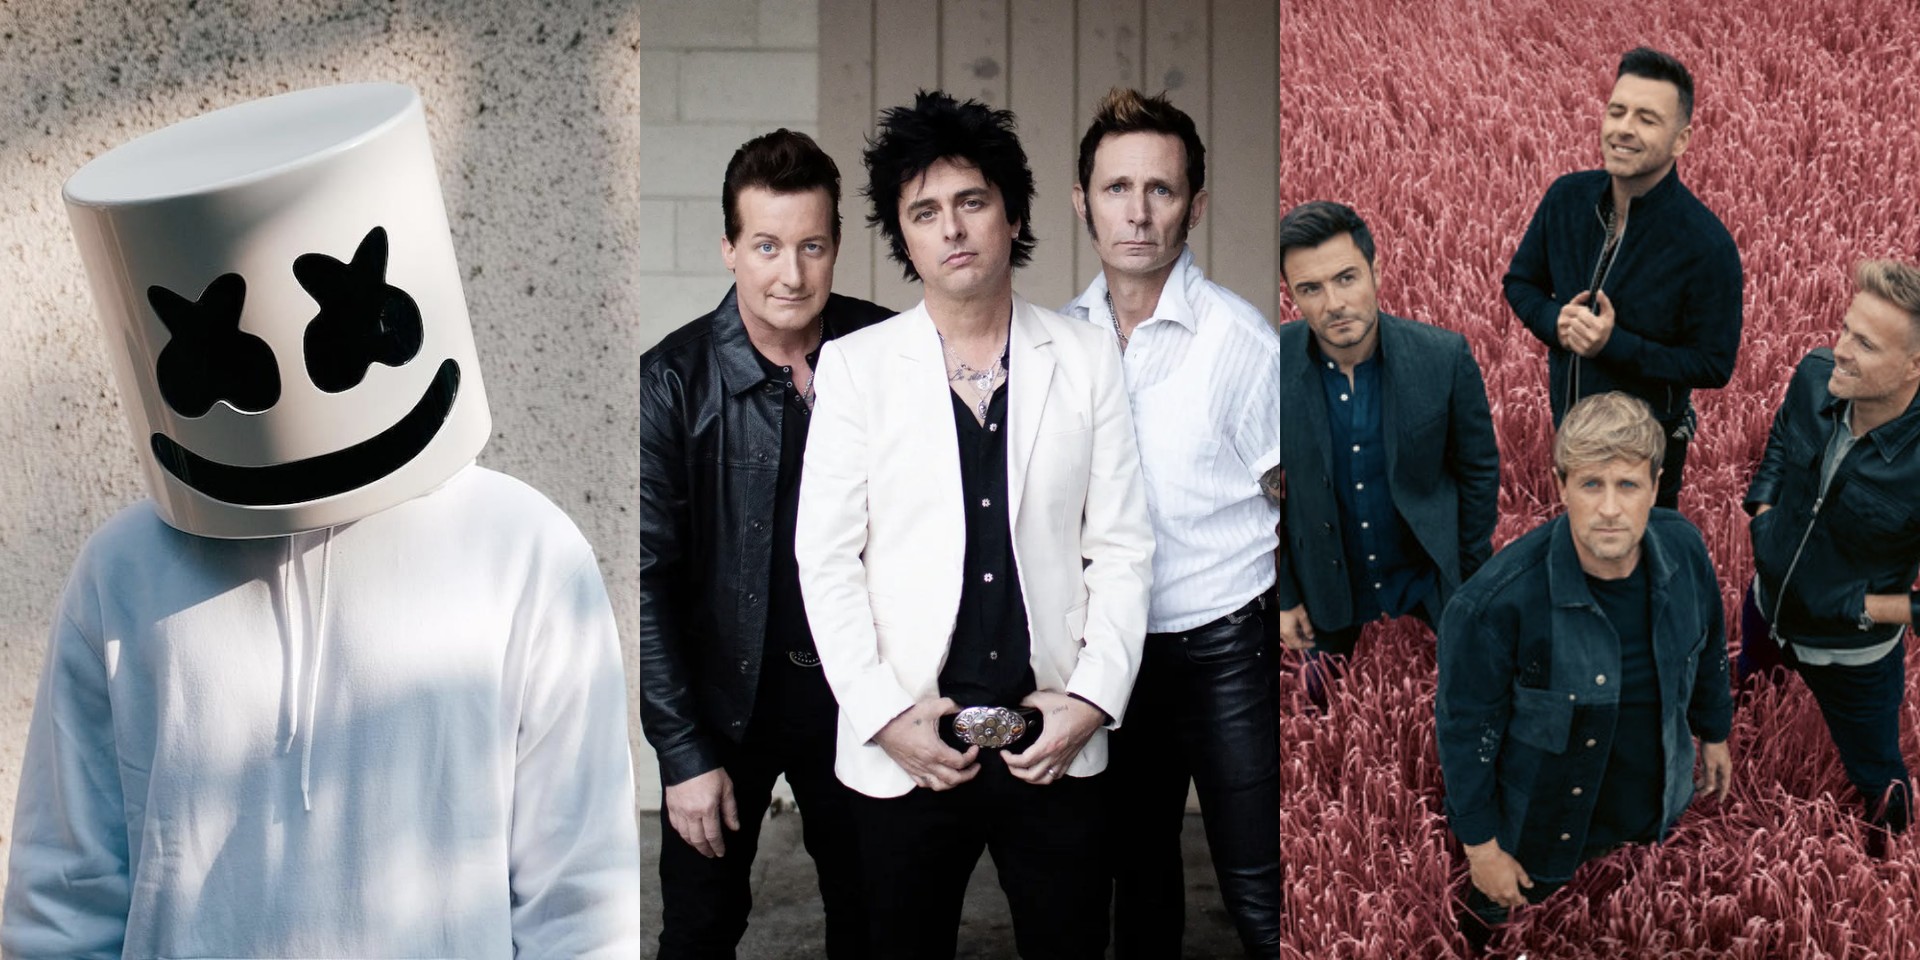 Formula 1 Singapore Grand Prix announces 2022 concert lineup – Green Day, Marshmello, Westlife, and more 